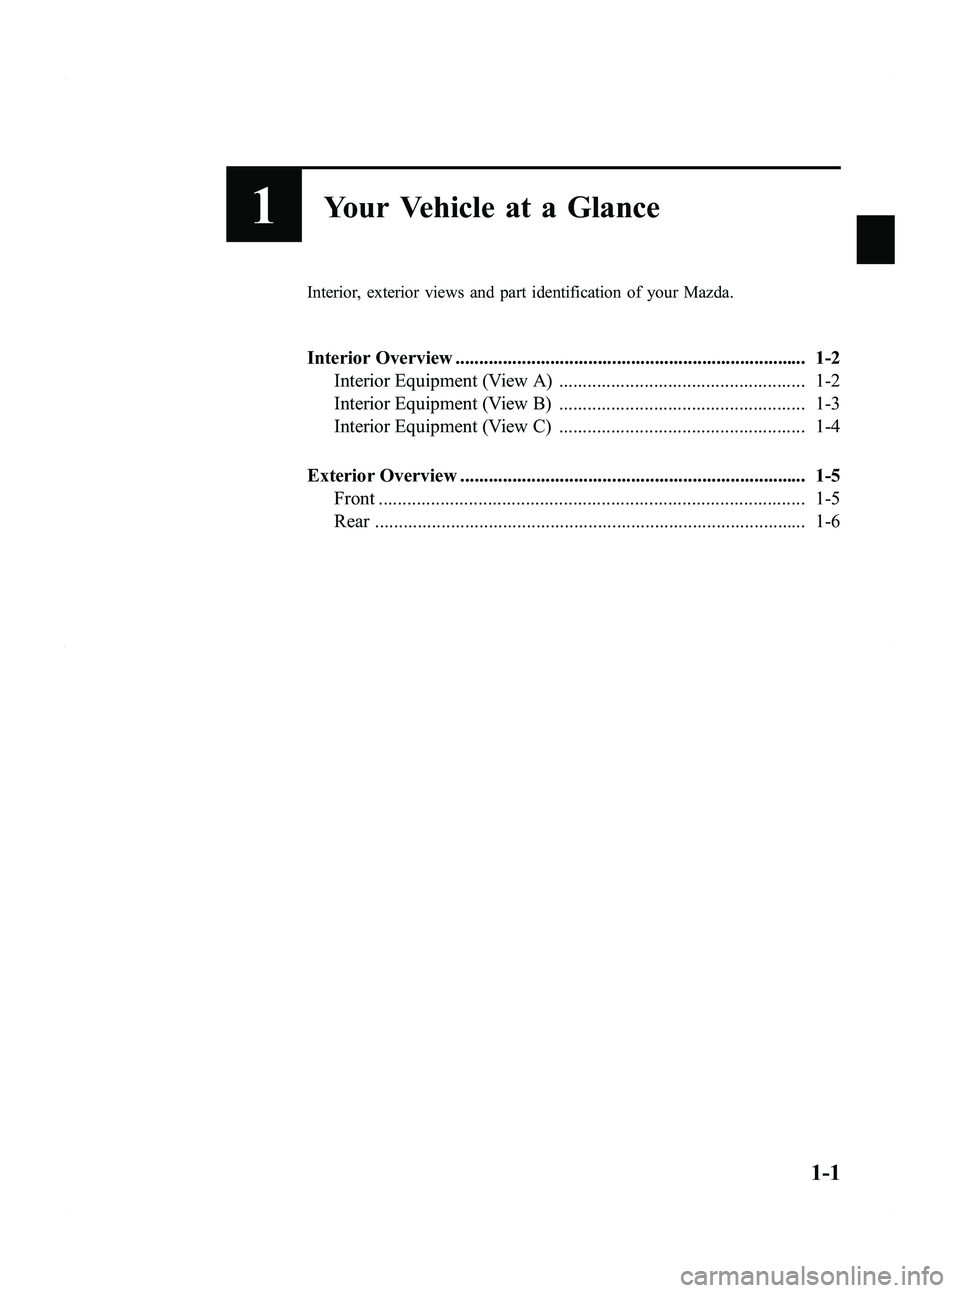 MAZDA MODEL 5 2012  Owners Manual Black plate (7,1)
1Your Vehicle at a Glance
Interior, exterior views and part identification of your Mazda.
Interior Overview ..........................................................................